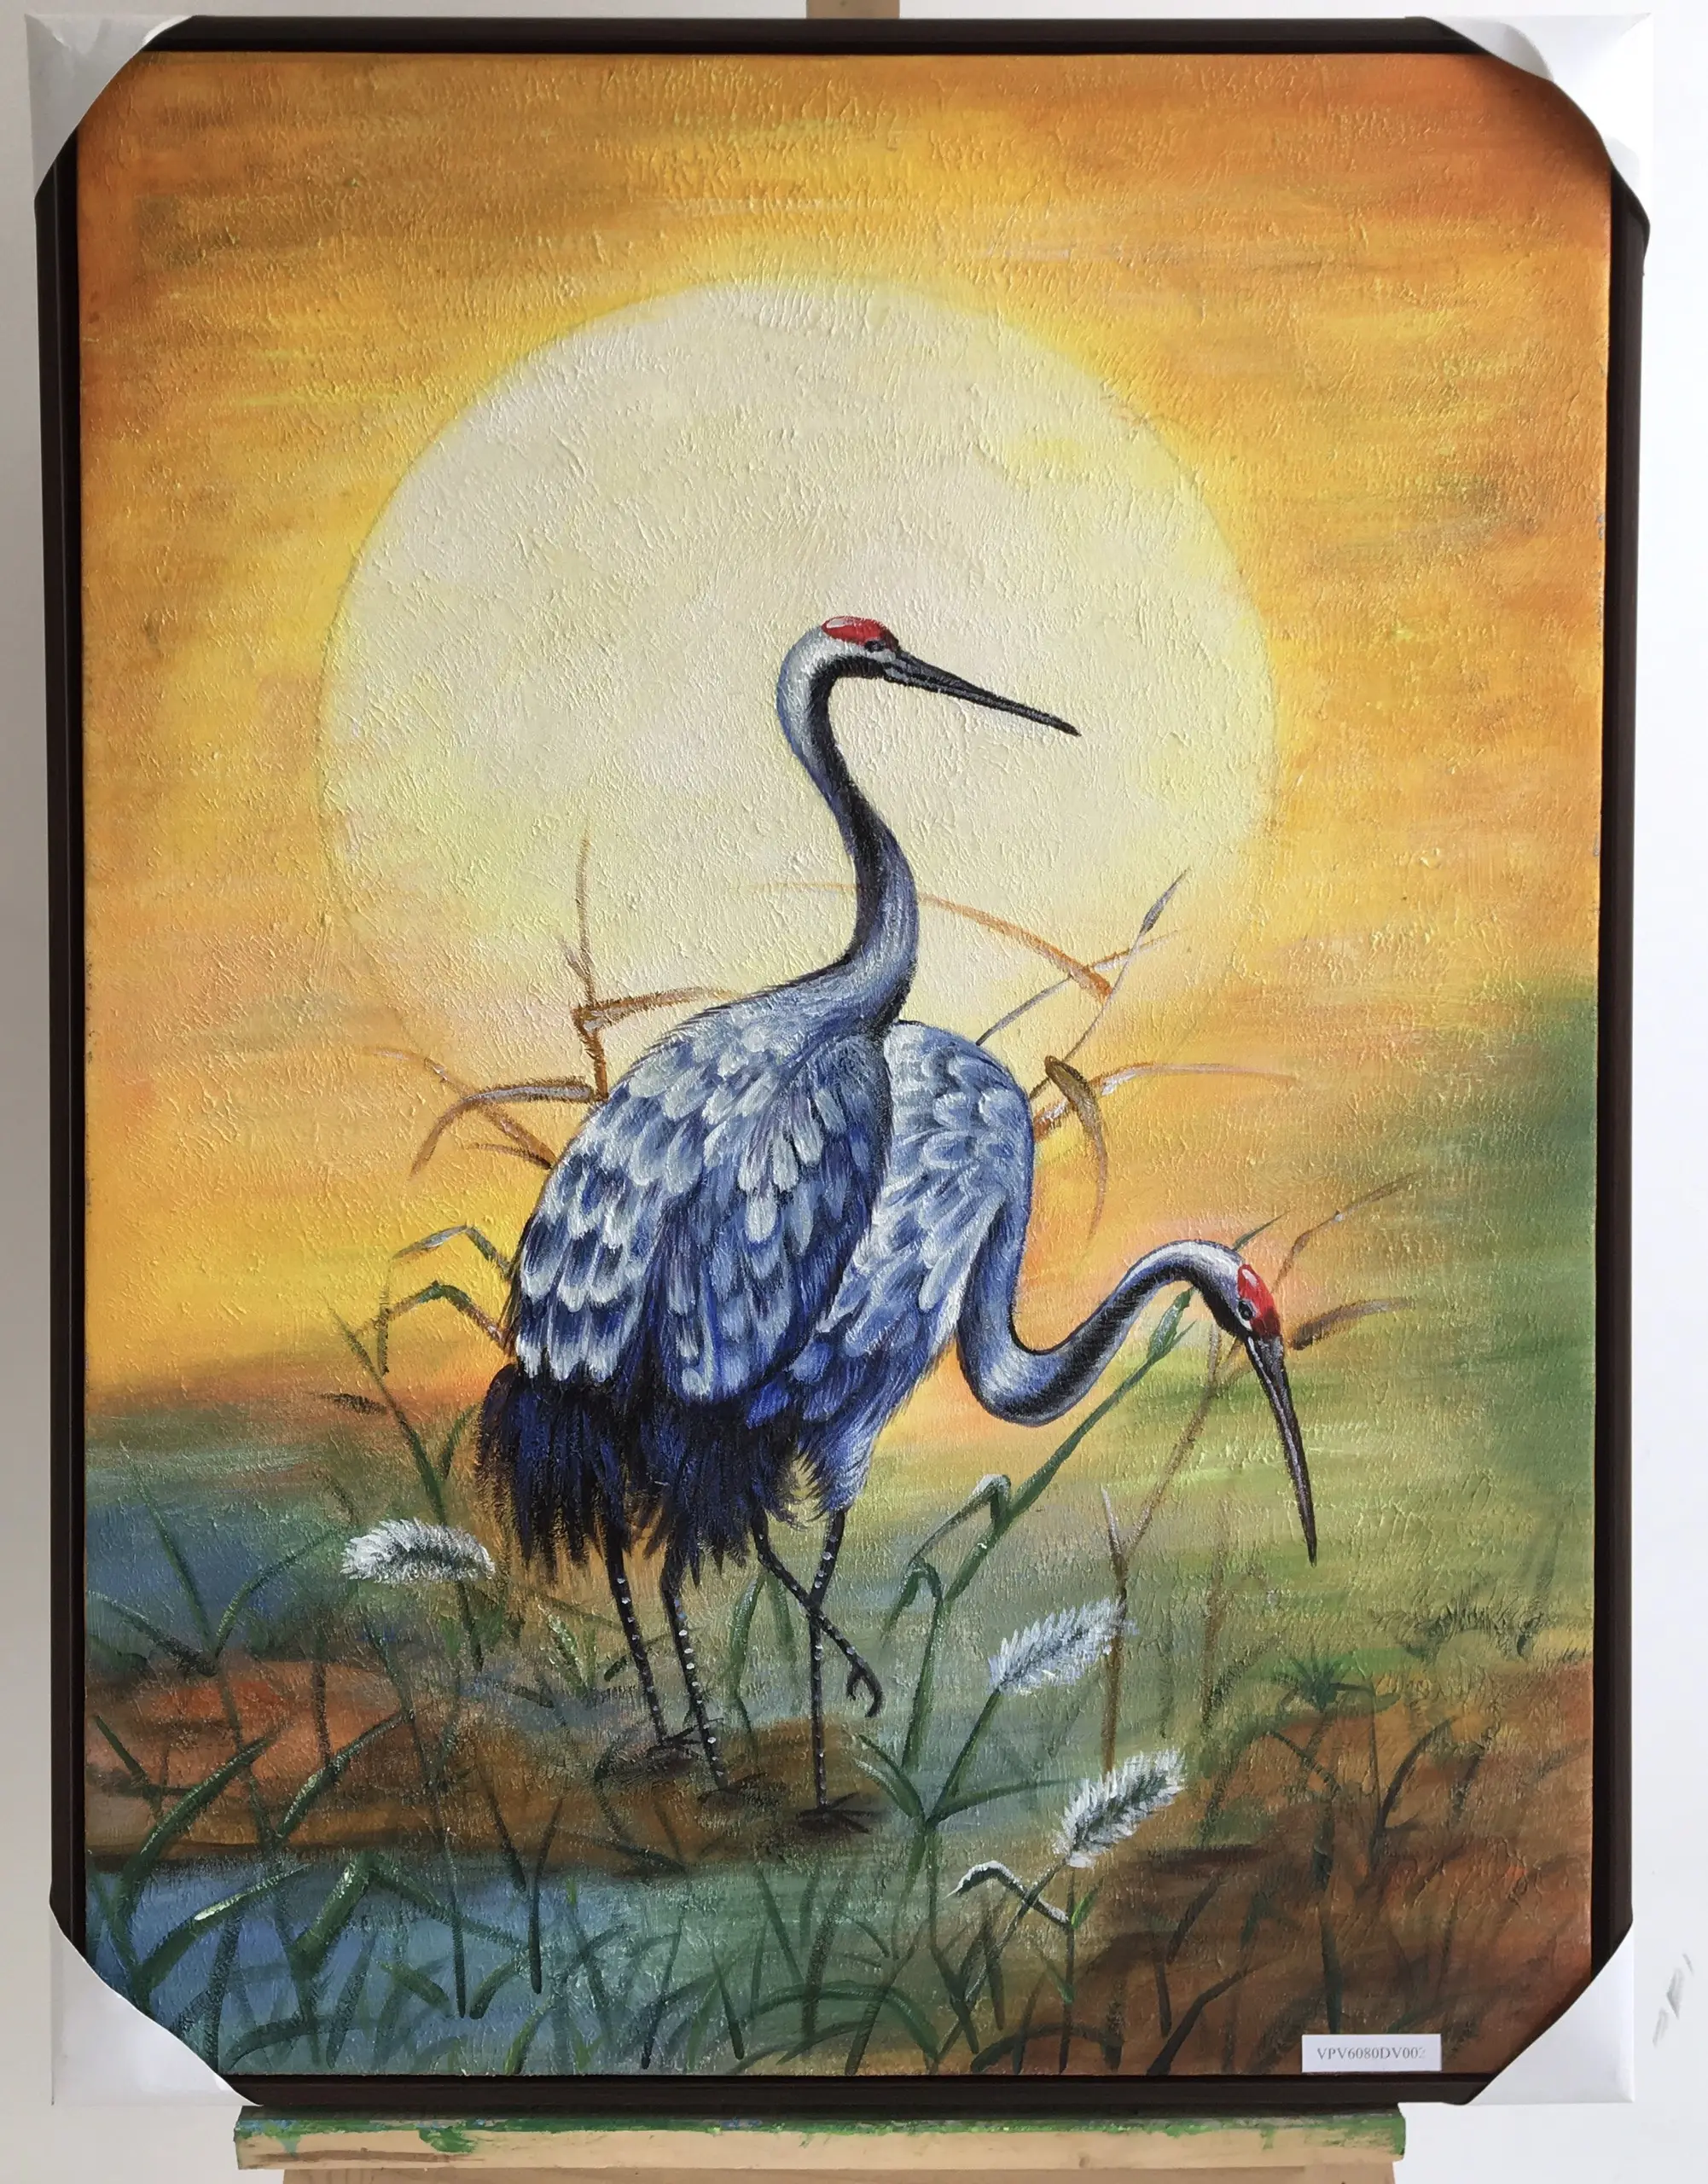 Vinpi Common Crane Landscape Bird Canvas Custom Oil Painting Decorative Garden Objects Paintings Hotel Home Cafe Office